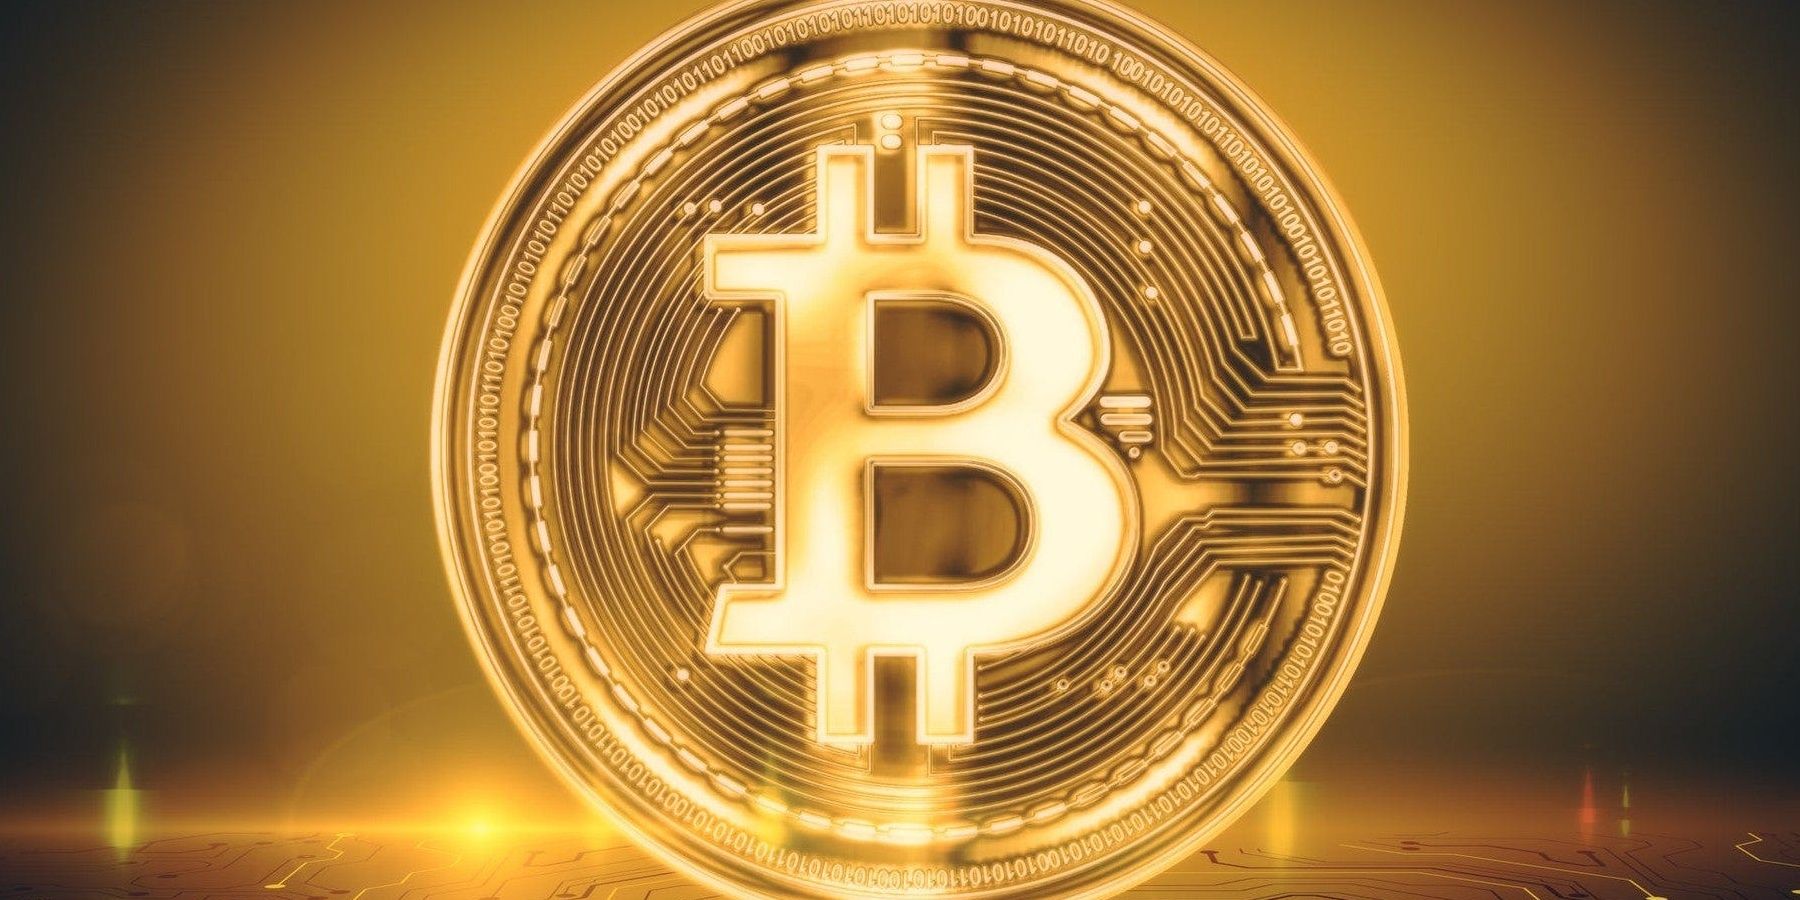 Bitcoin, one of the most important cryptocurrencies in 2021.